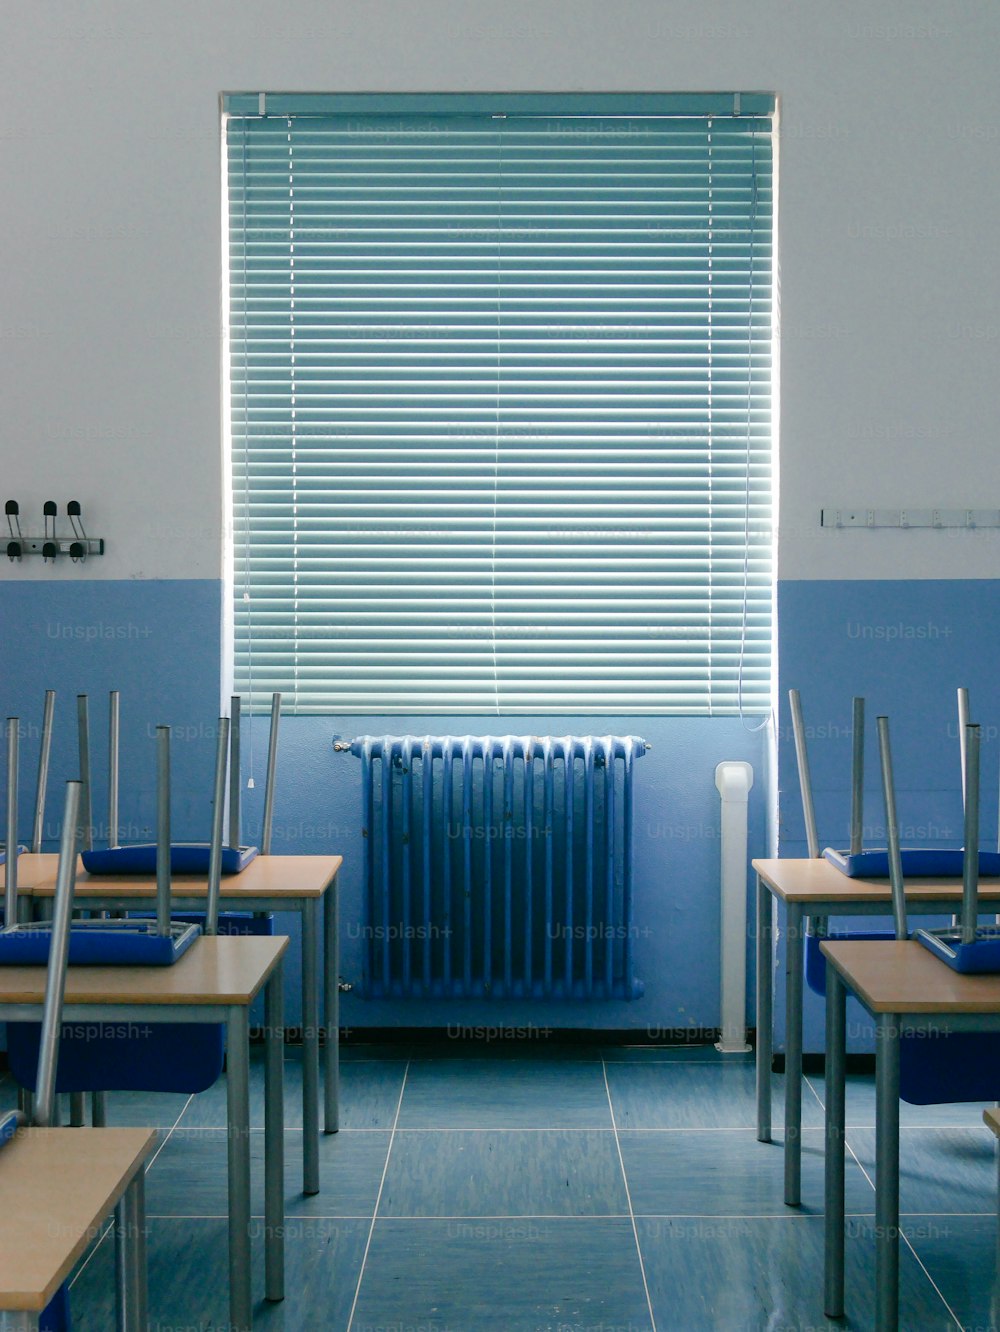 a row of desks in front of a window with a radiator